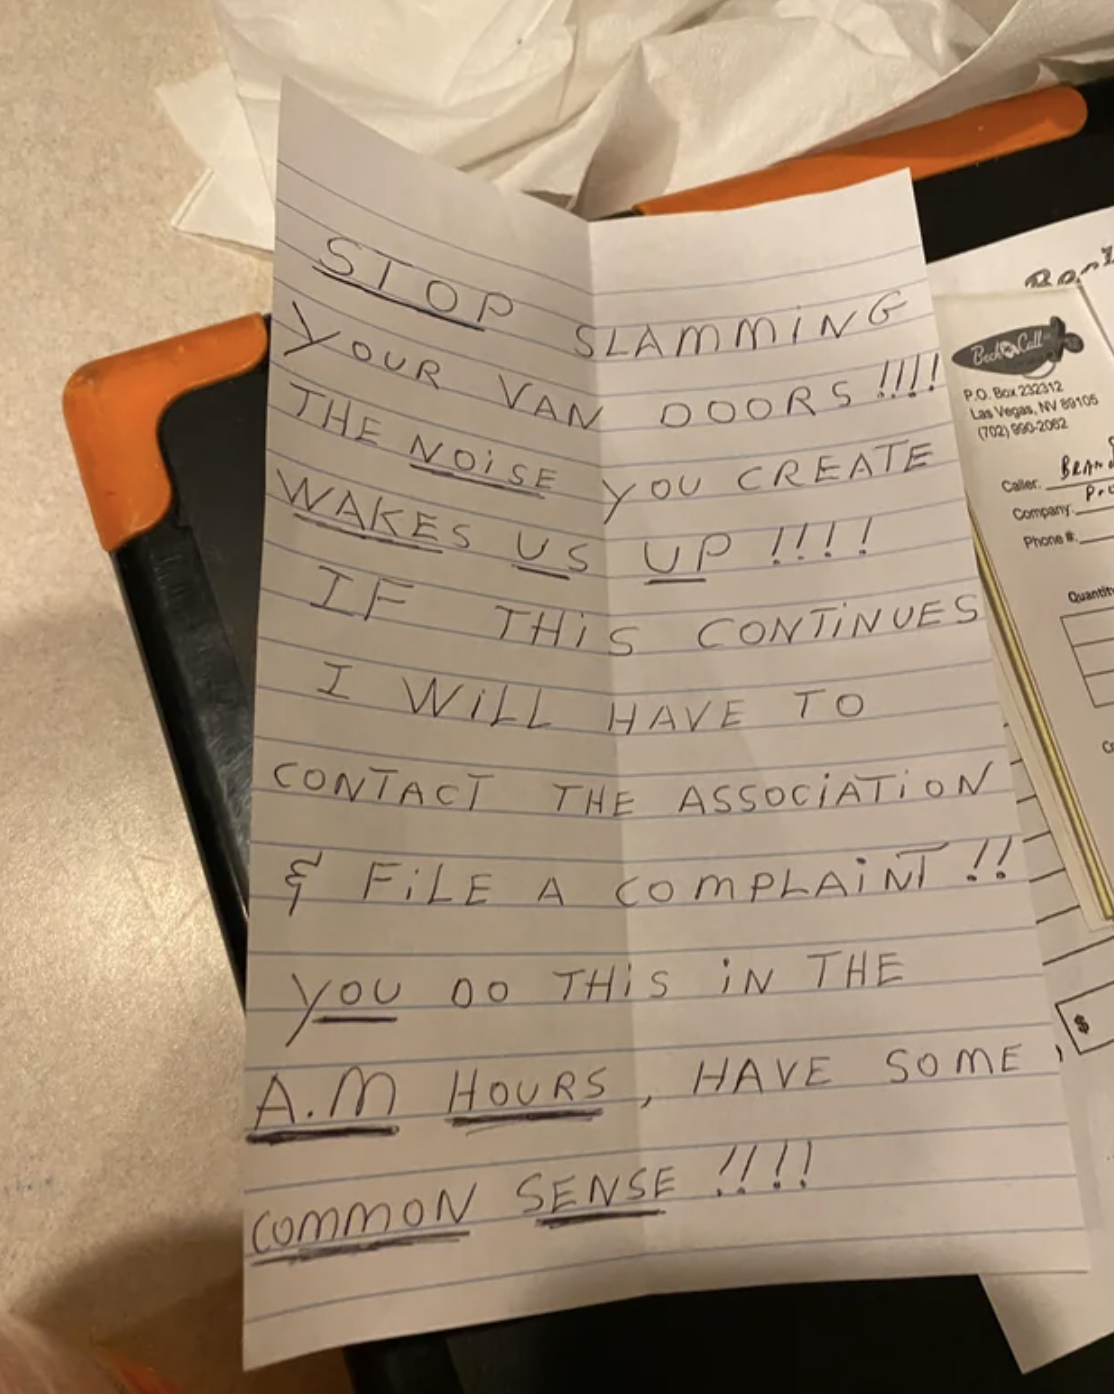 note says to stop slamming car doors and making so much noise in the morning